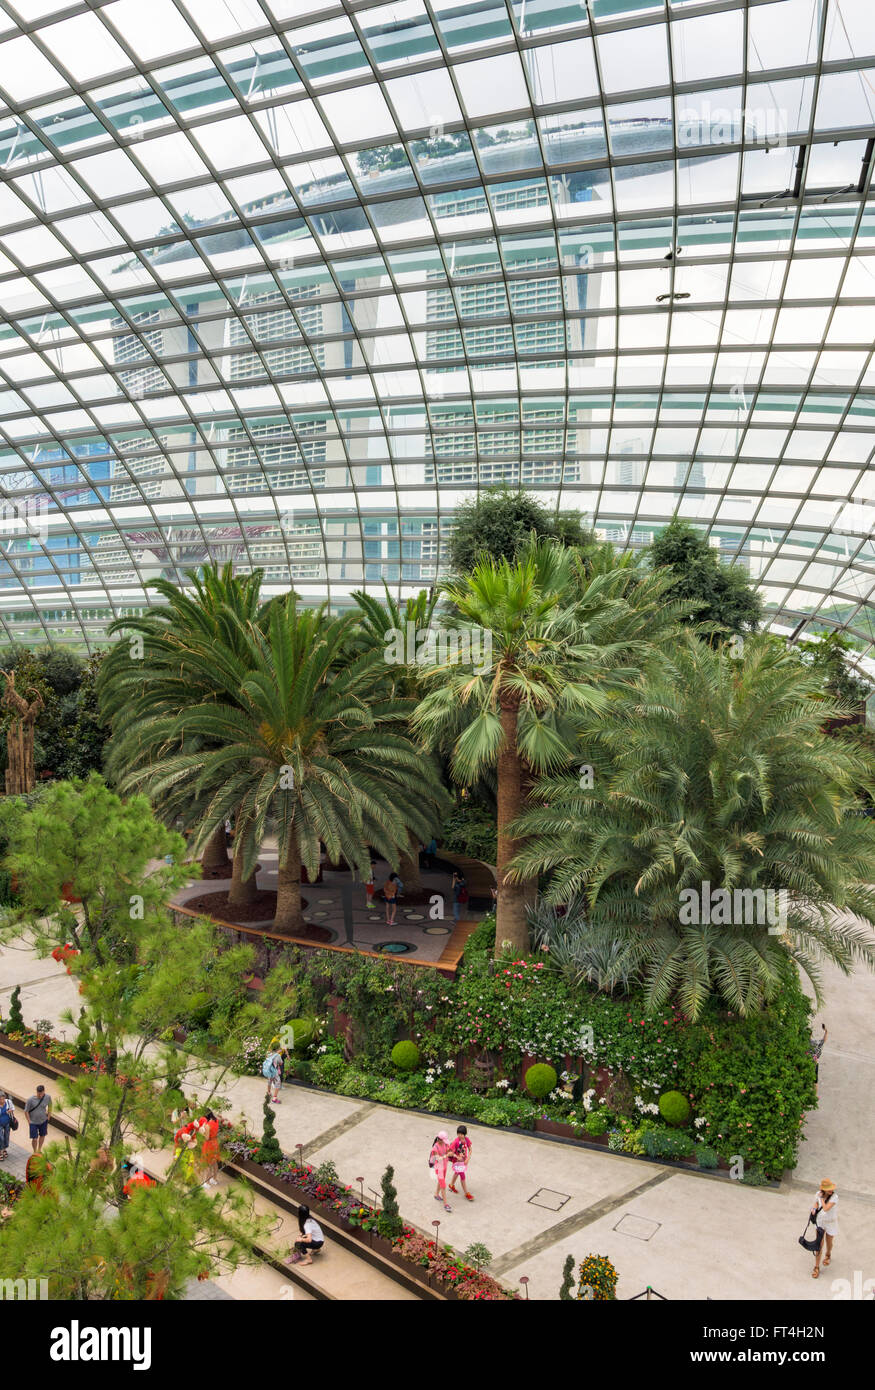 Detail inside the Flower Dome, overlooked by the Marina Bay Sands Hotel at the Gardens by the Bay, Singapore Stock Photo